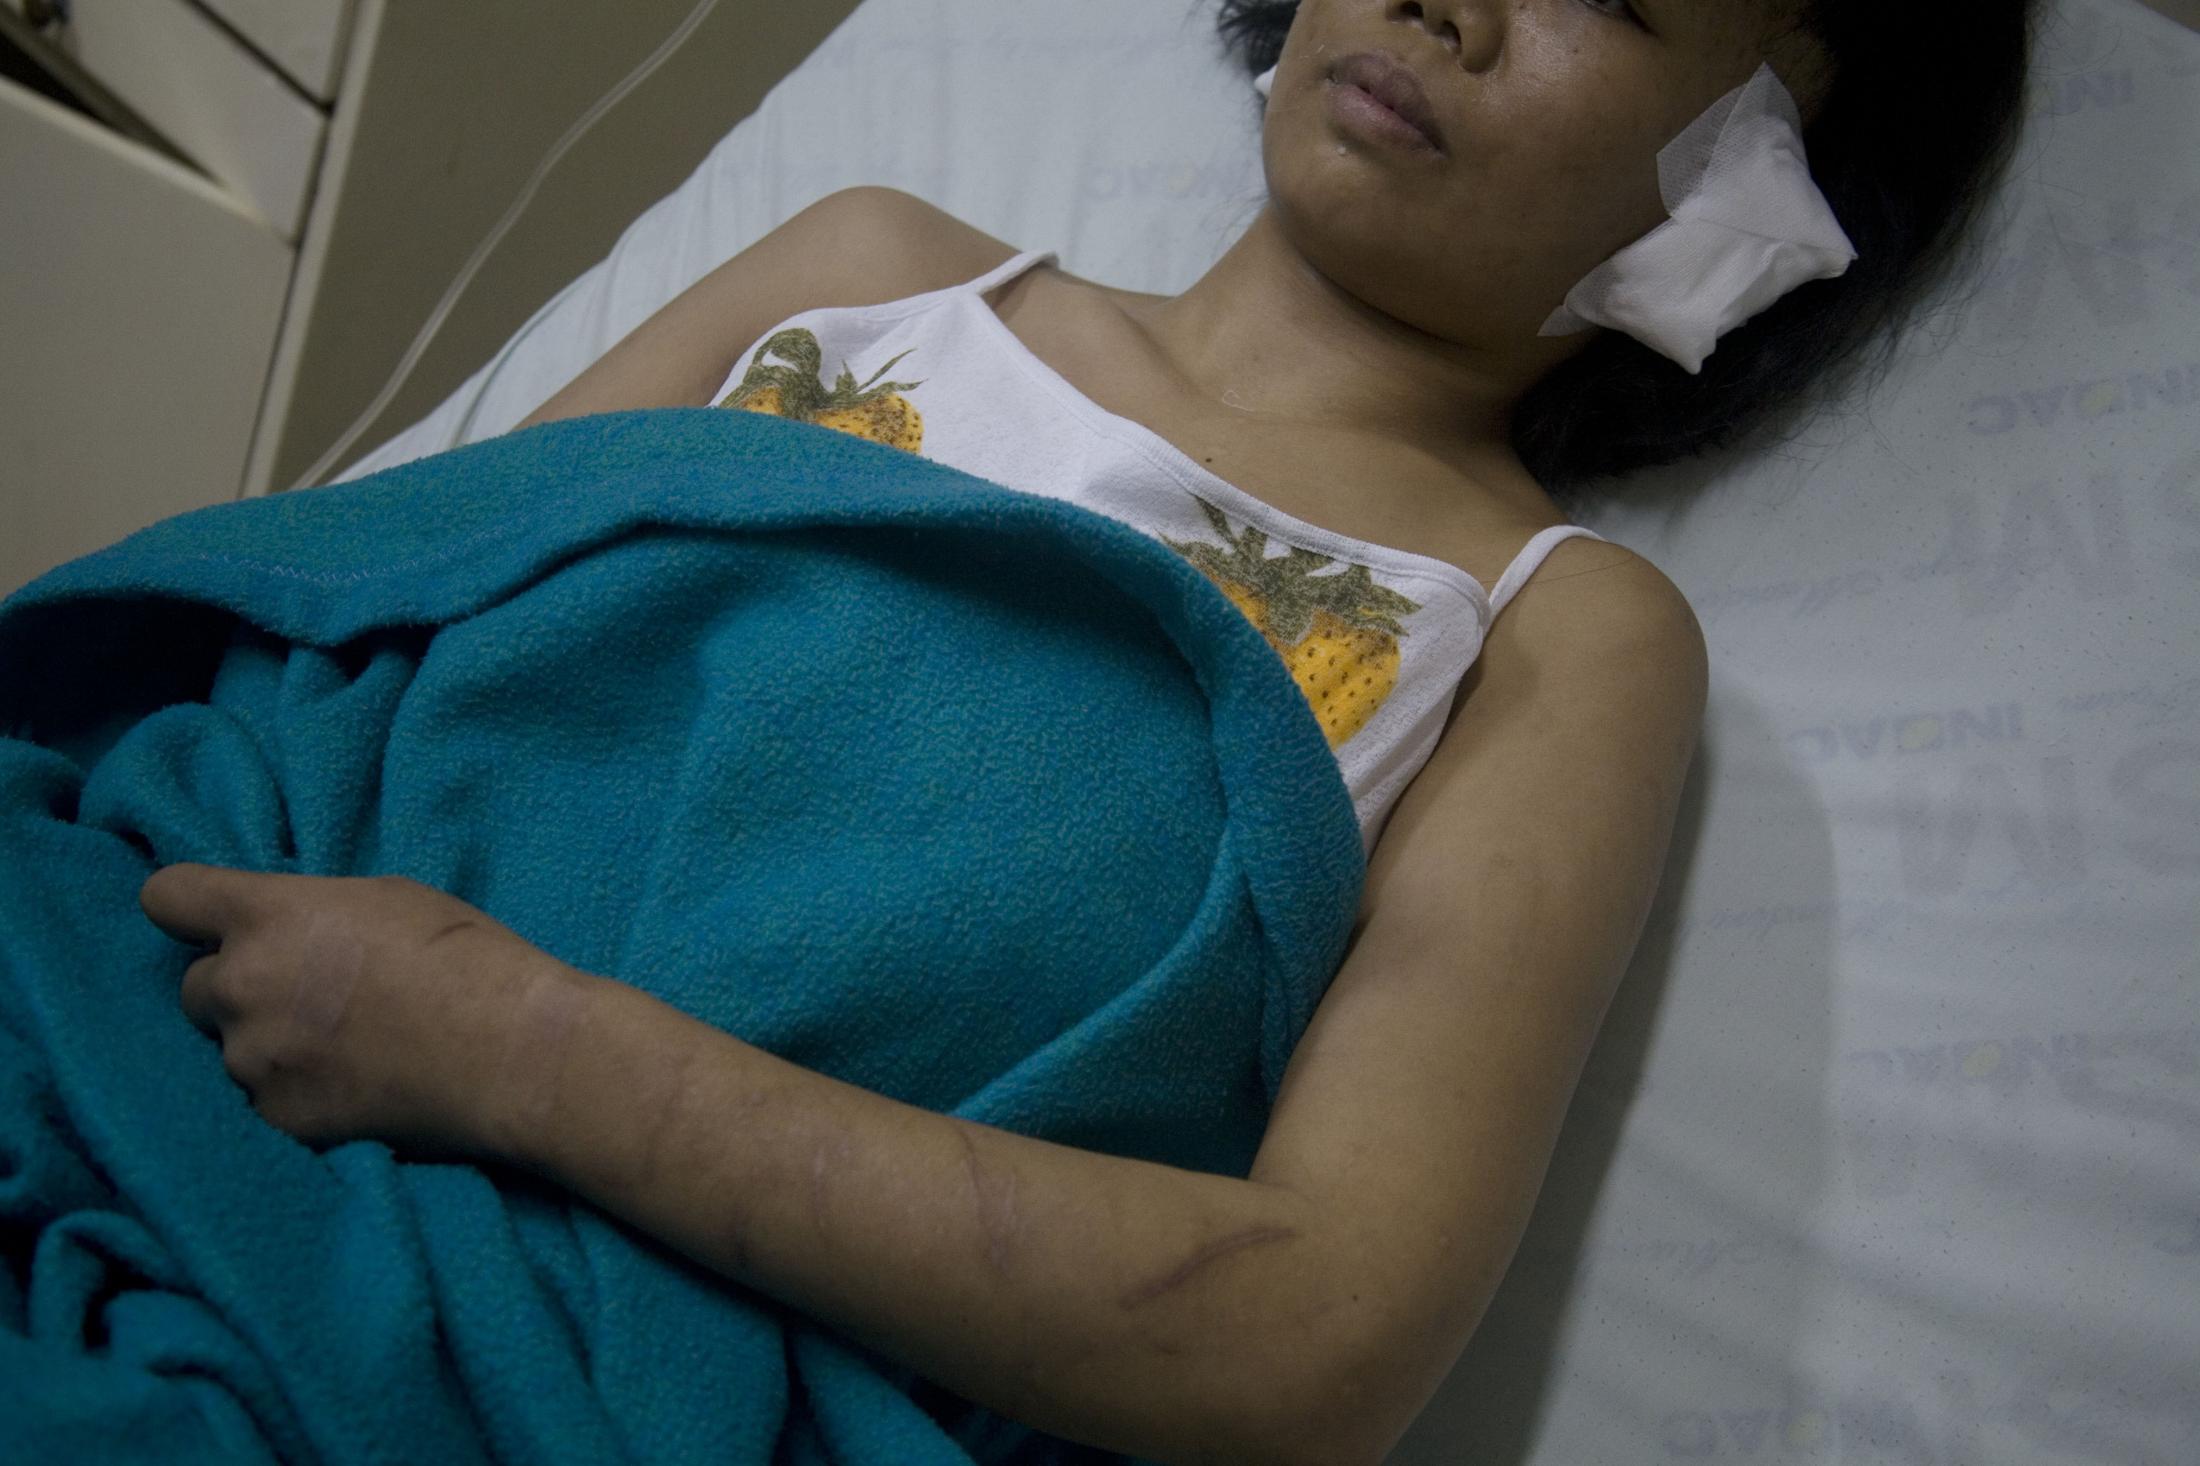 Sri (not her real name), 27, whose employer in the Middle East abused her, recovers at a hospital...